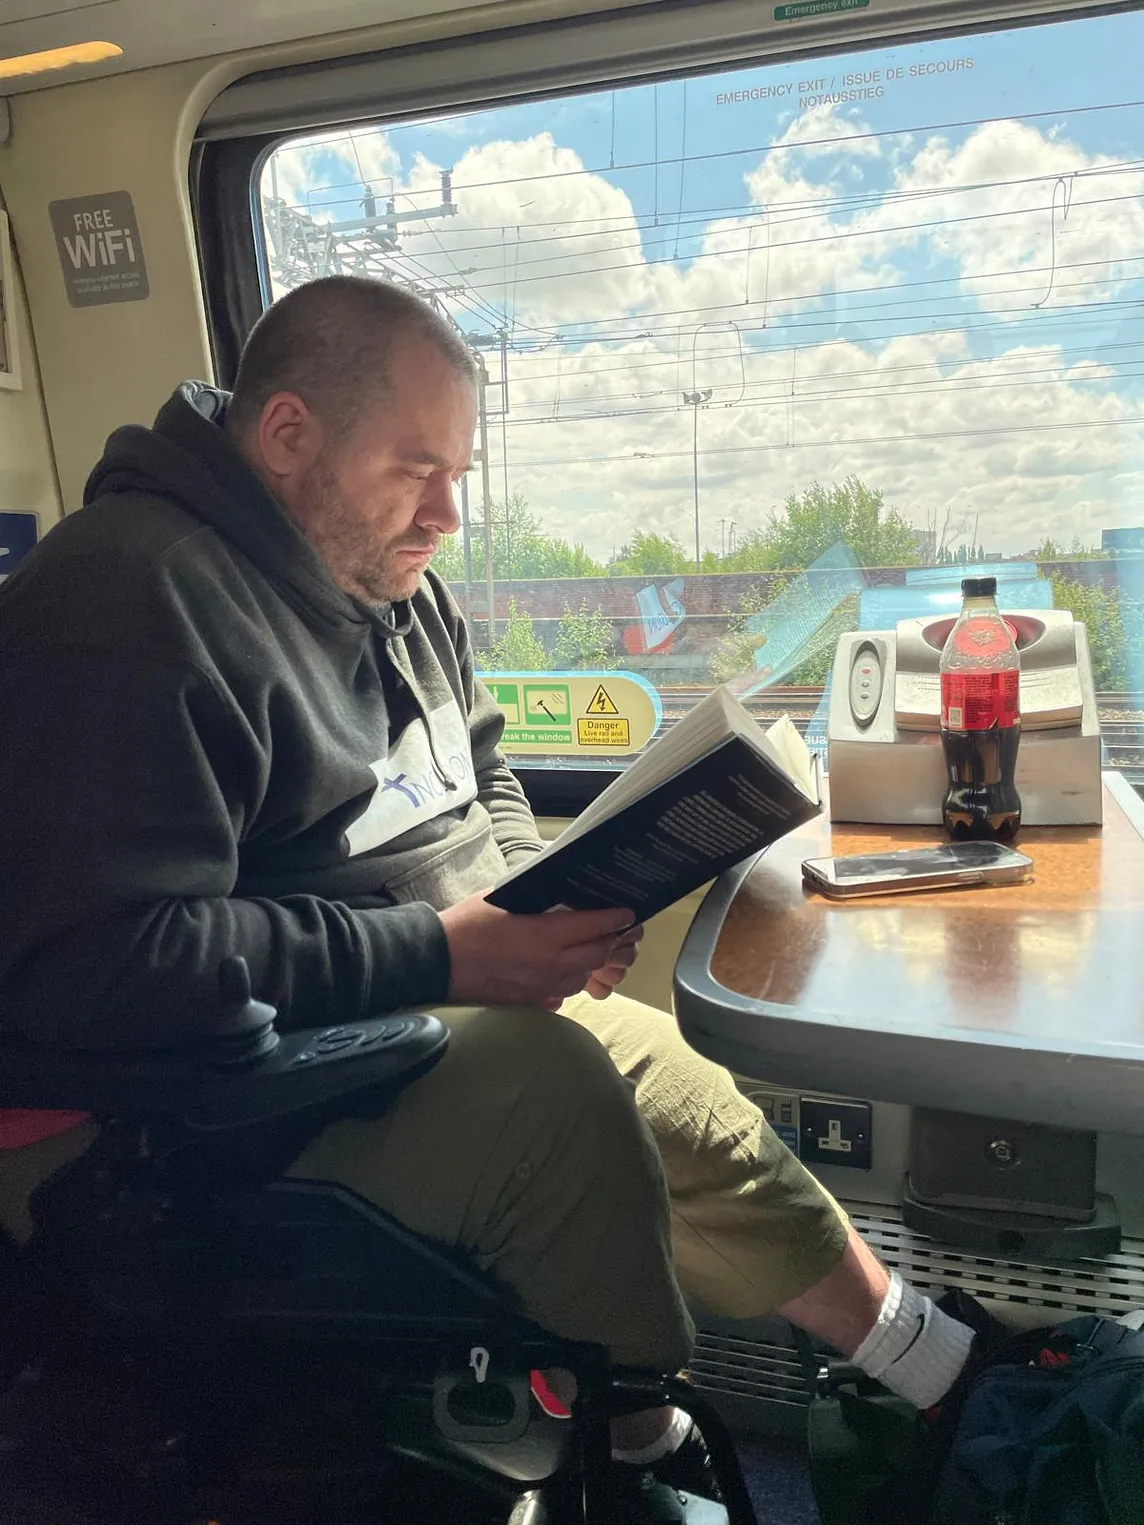 Scott sat reading on a train. On the table in front is a bottle of drink and his phone